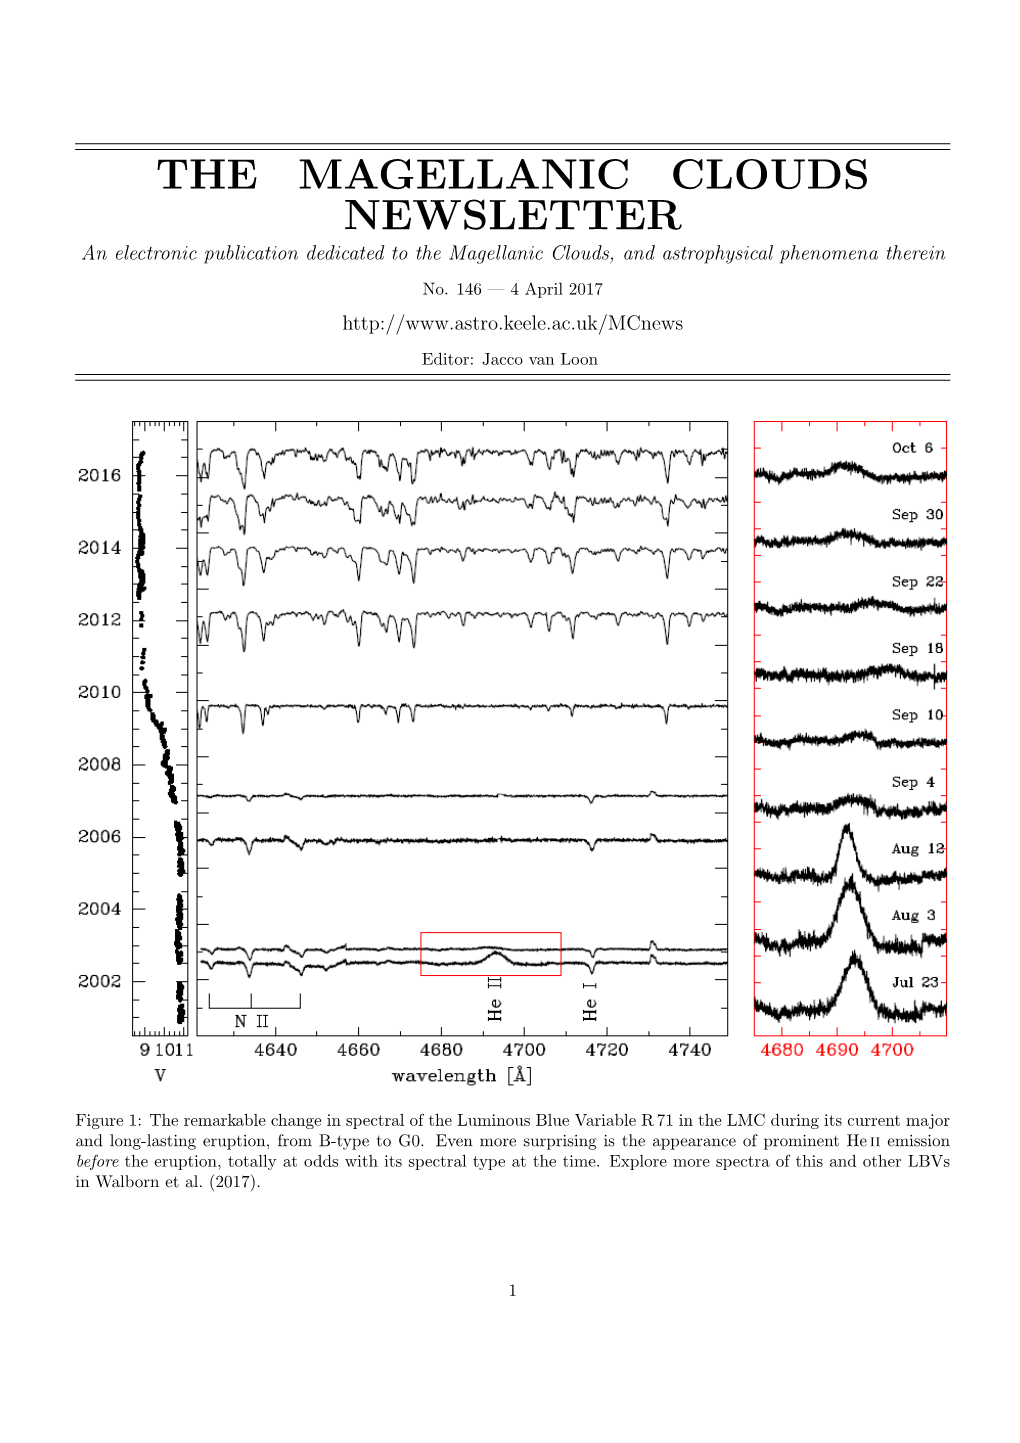 THE MAGELLANIC CLOUDS NEWSLETTER an Electronic Publication Dedicated to the Magellanic Clouds, and Astrophysical Phenomena Therein